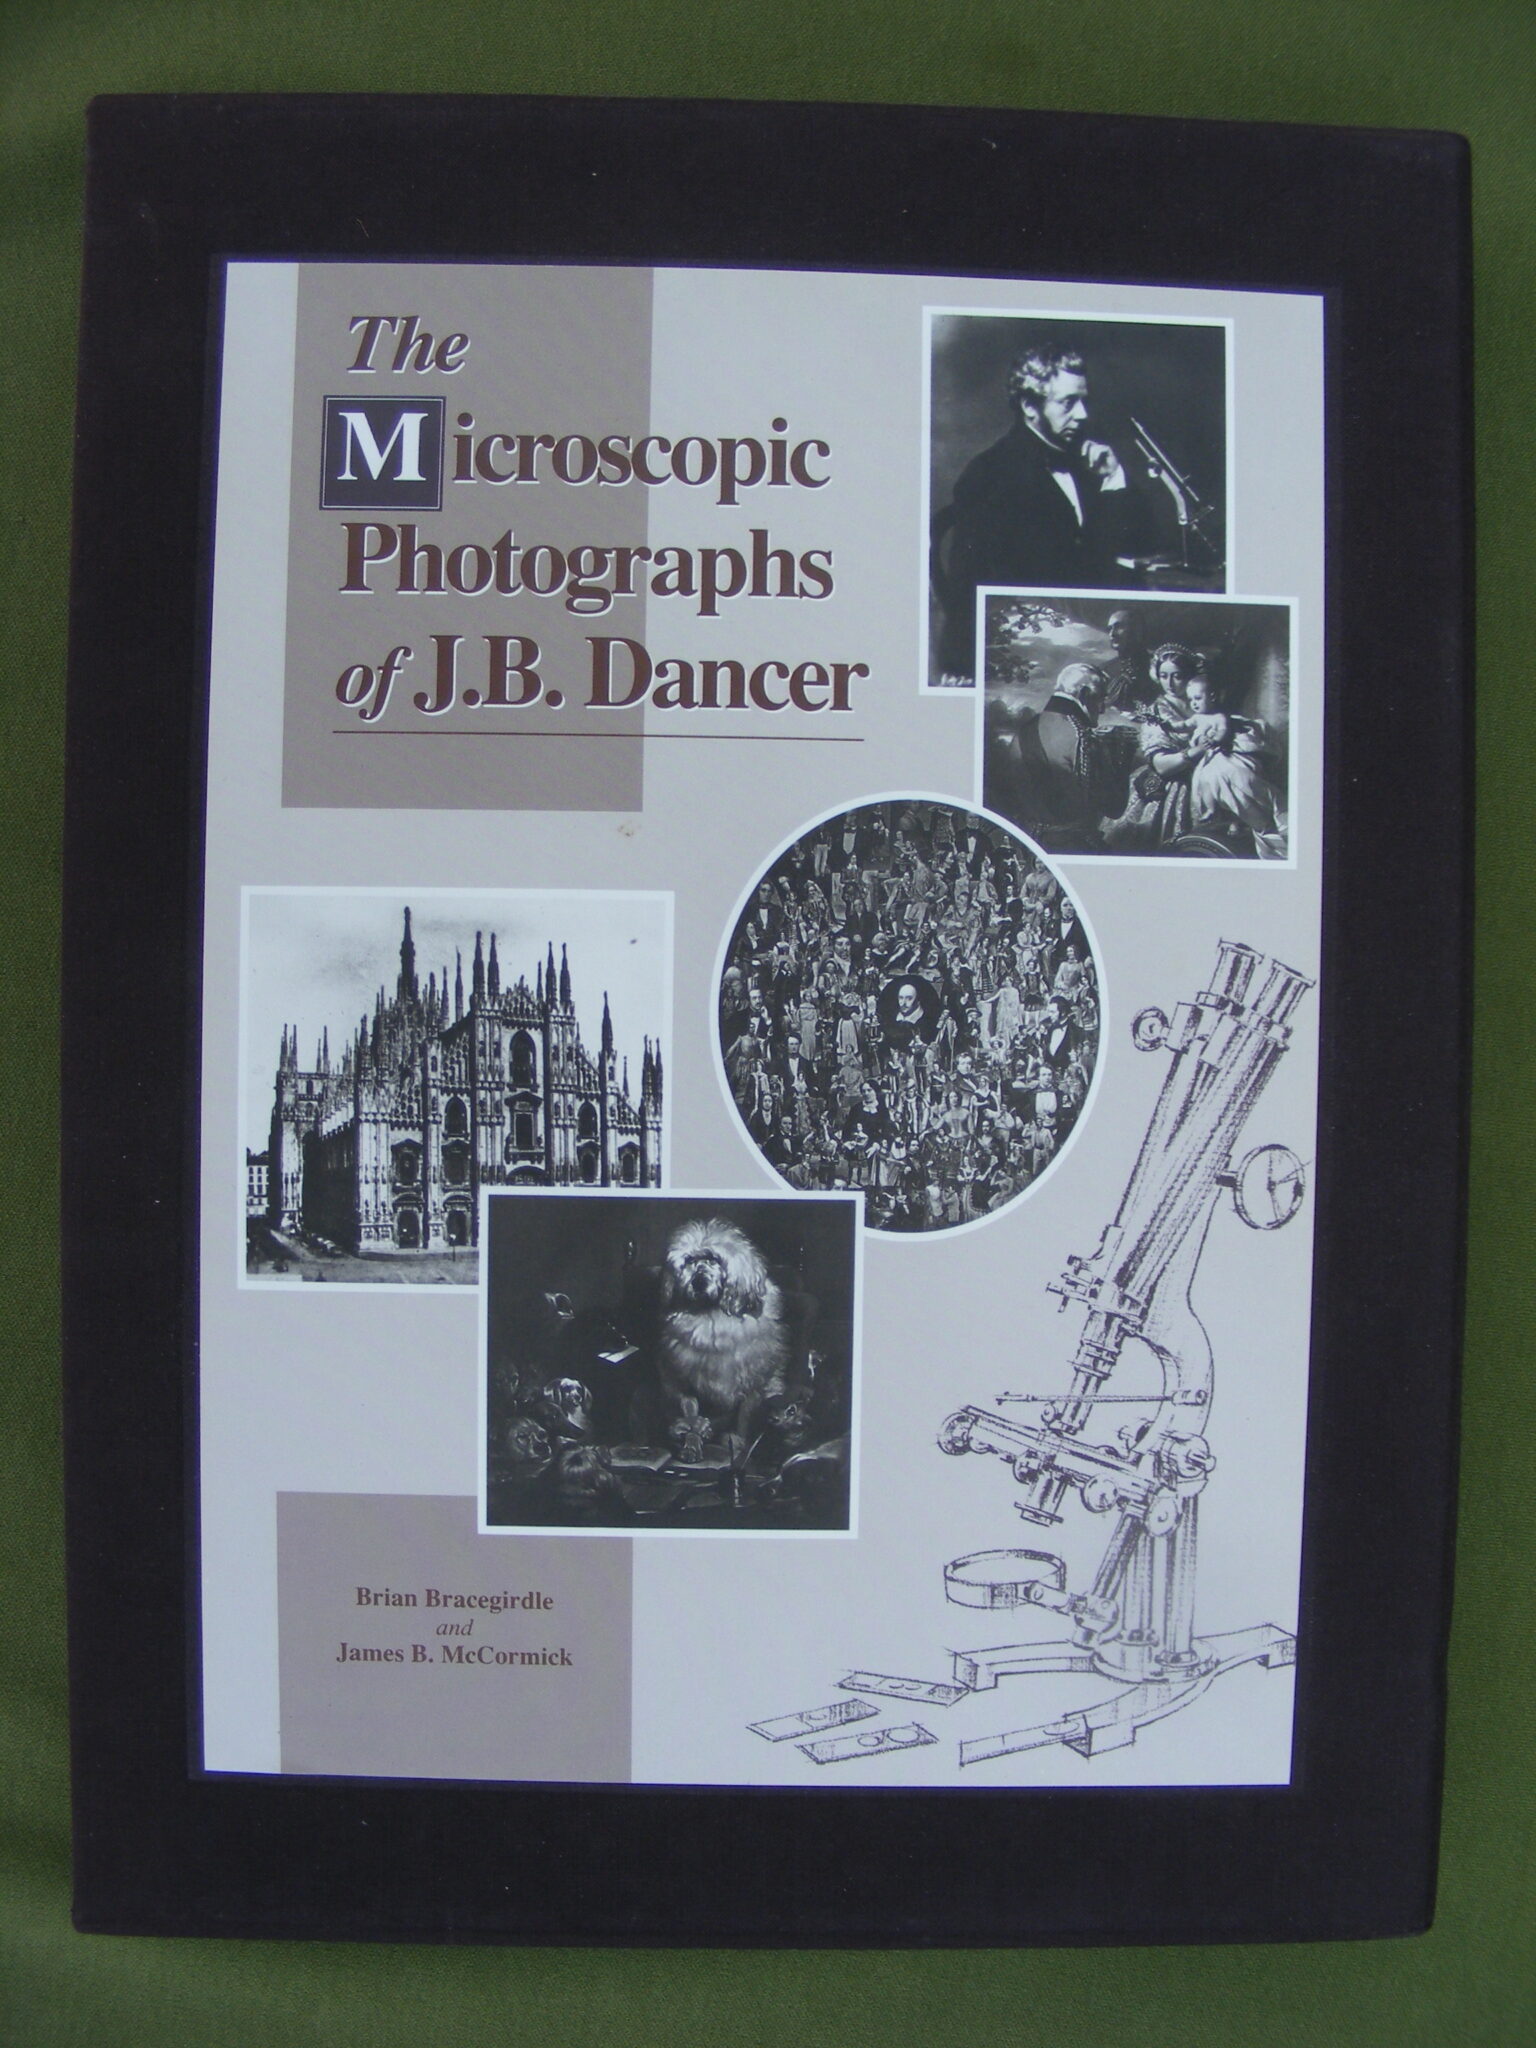 BOOKS ON COLLECTING MICROSCOPES